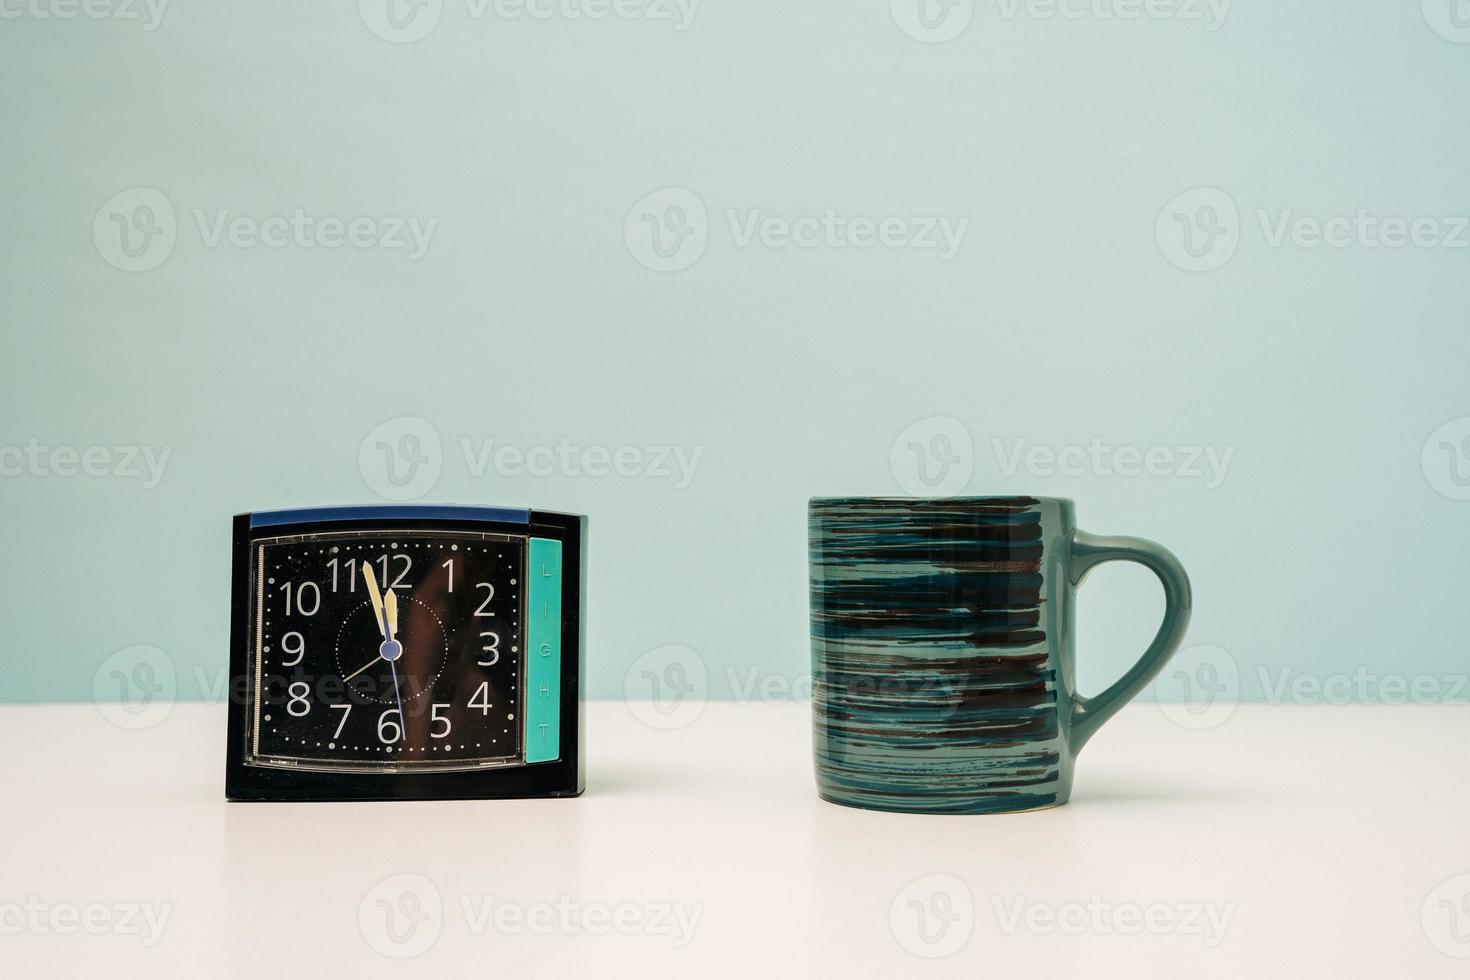 square modern alarm clock and mug on the table on a turquoise background photo